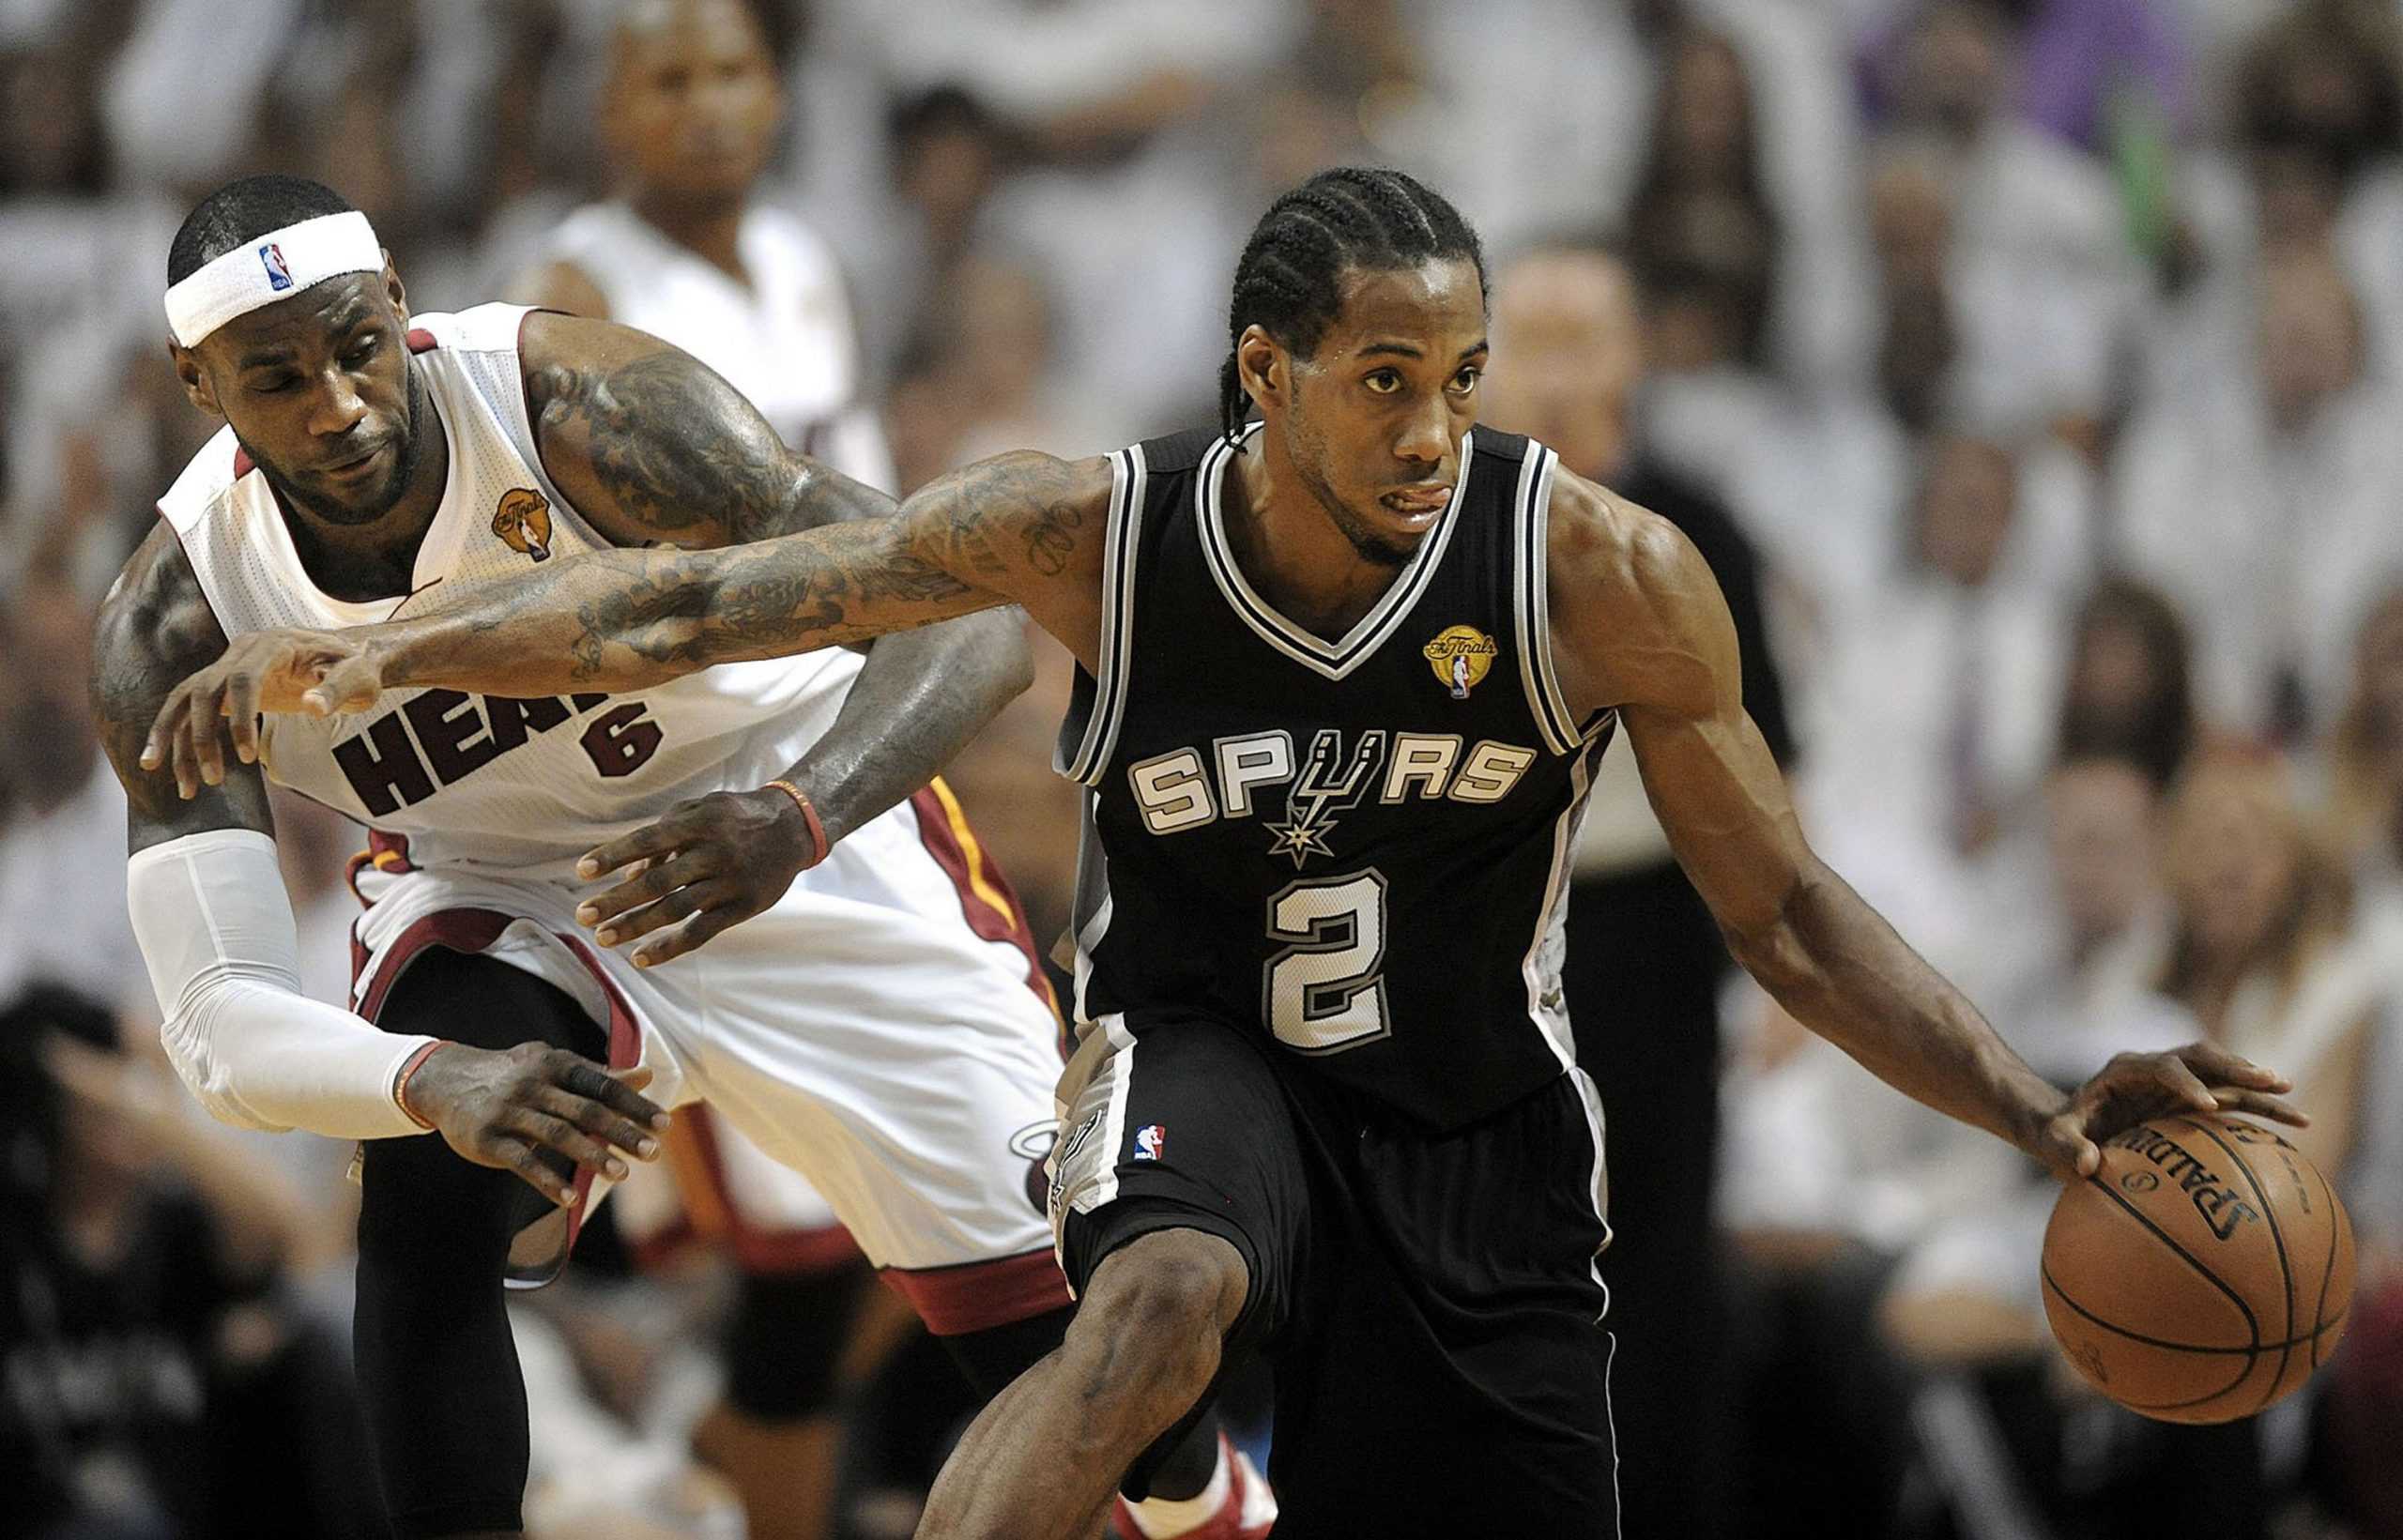 The San Antonio Spurs Kawhi Leonard (2) dribbles around the Miami Heats LeBron James during Game 4 of the NBA Finals at American Airlines Arena in Miami on June 12, 2014. (Michael Laughlin/Sun Sentinel/TNS)